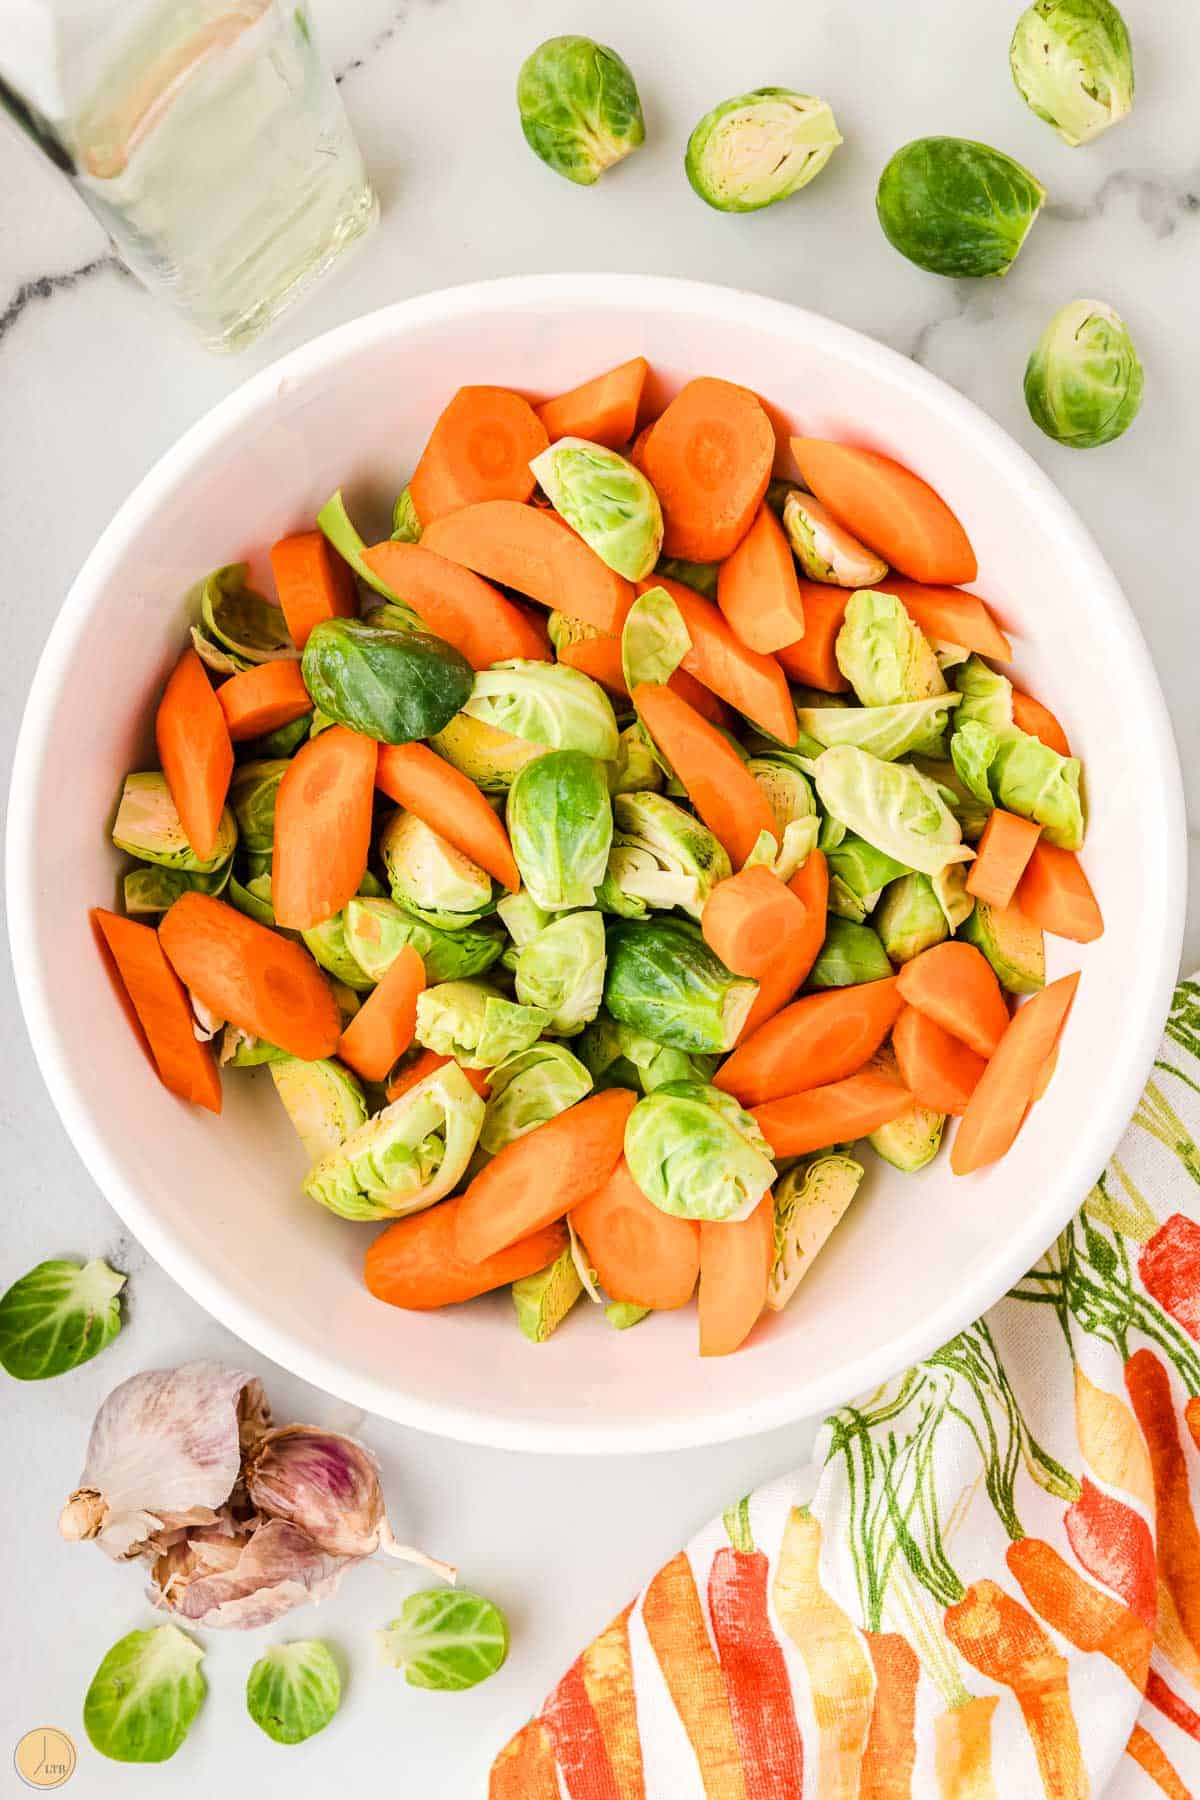 carrots and fresh brussels sprouts in a bowl